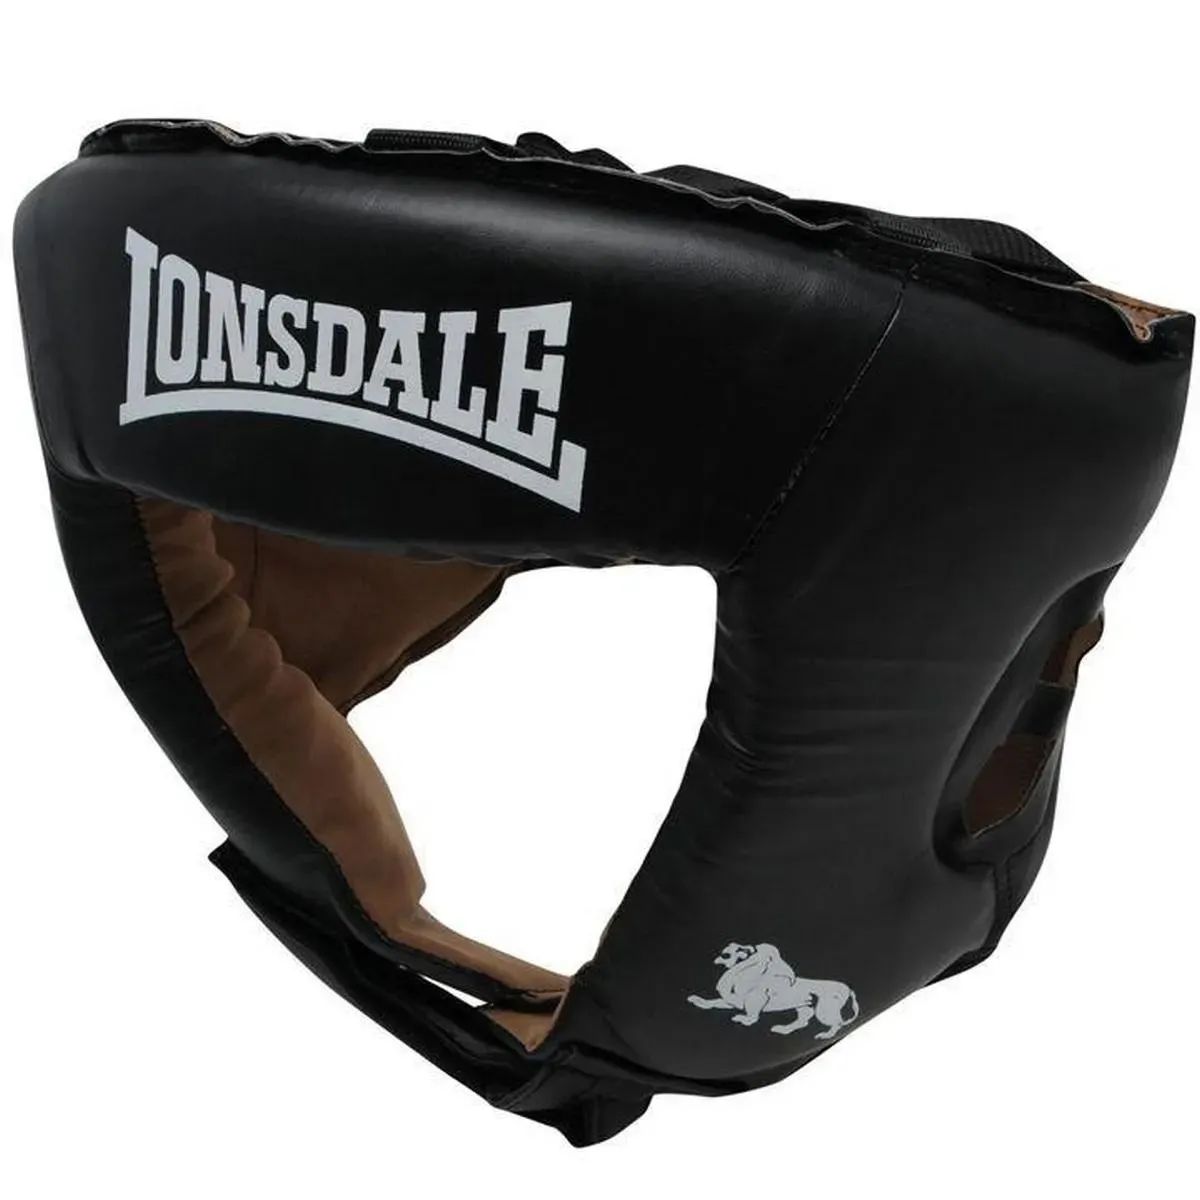 Lonsdale Fitness oprema TBC CHALL H/GUARD 0 BLACK LARGE 